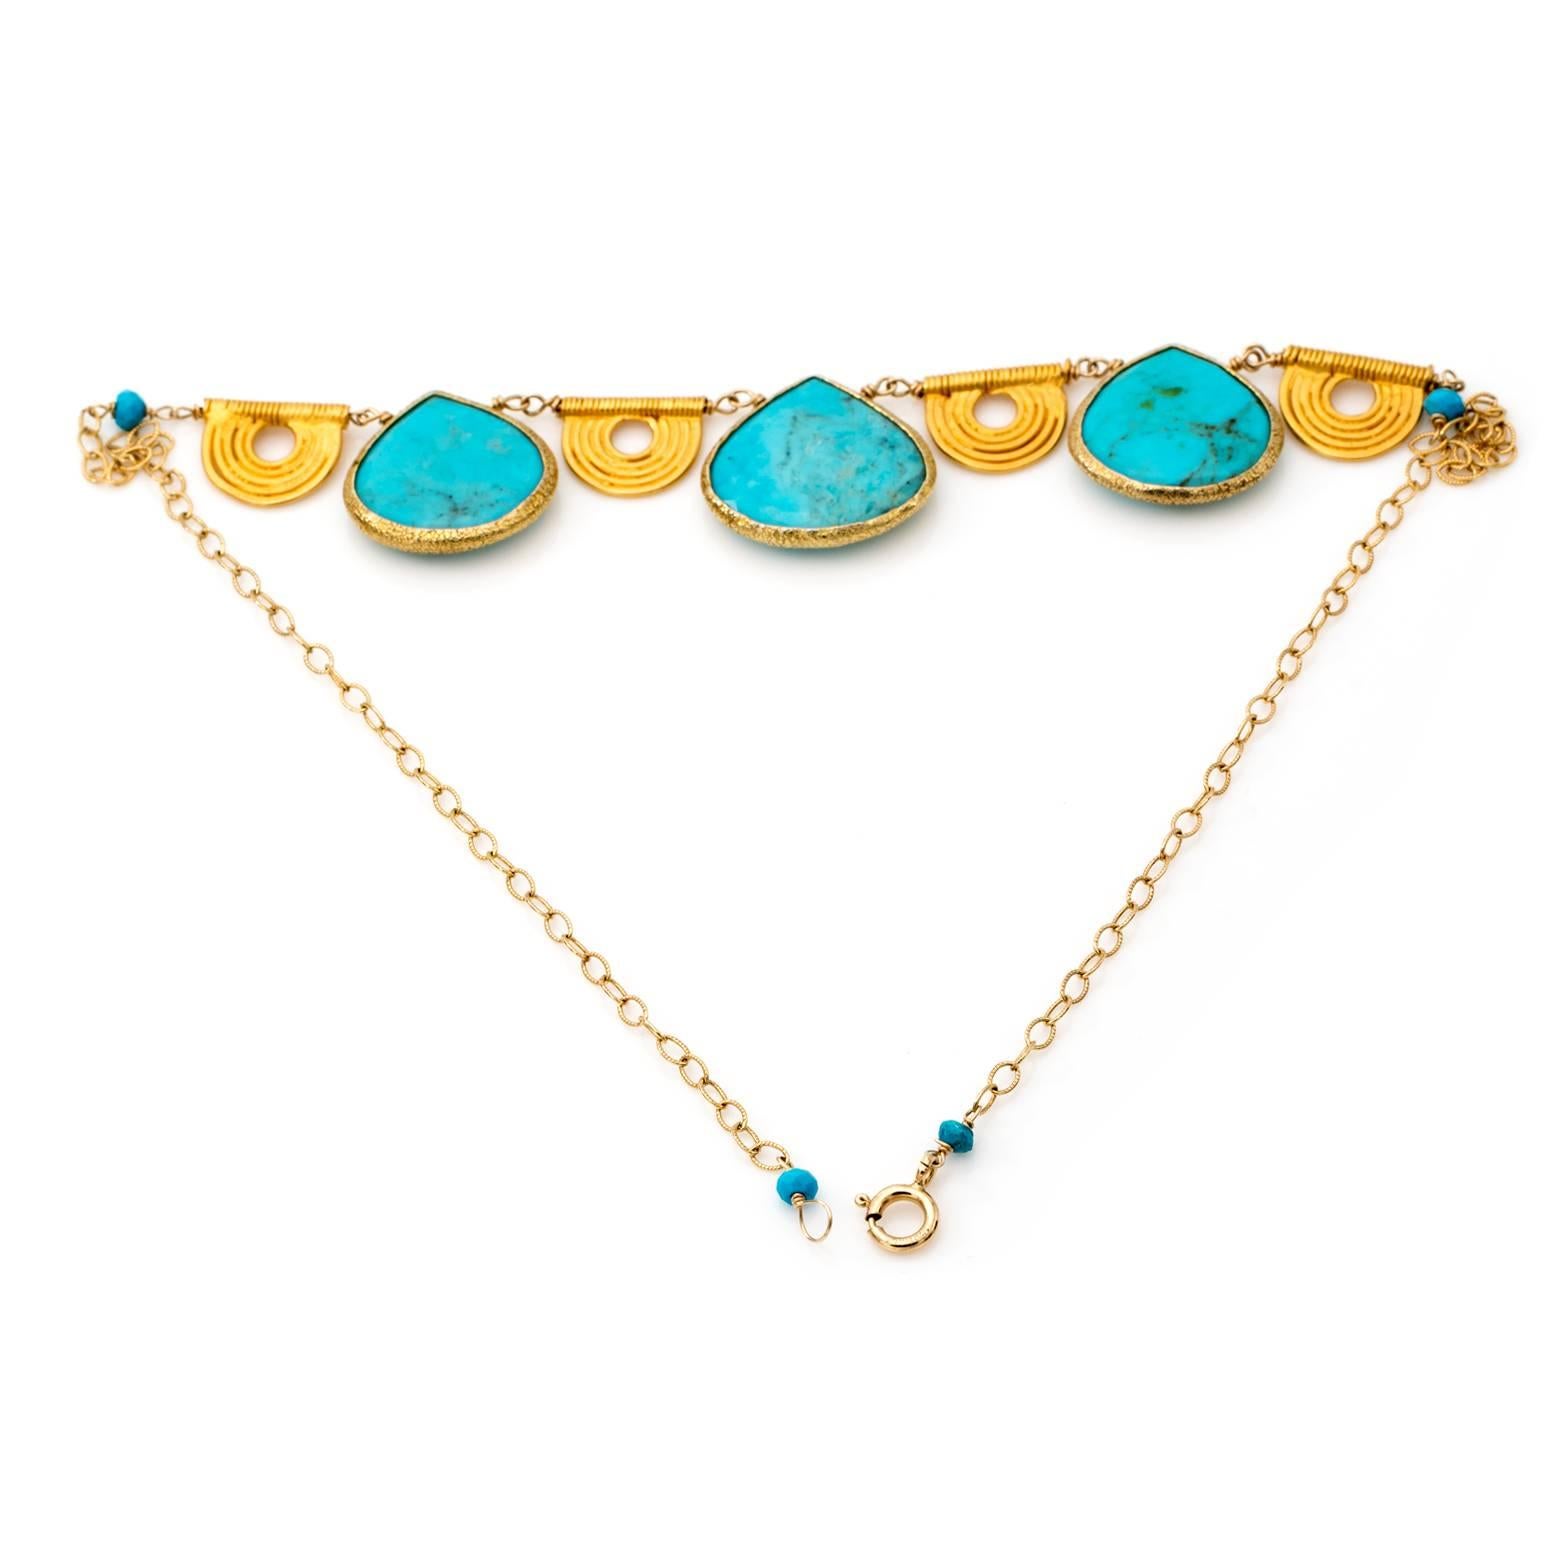 Contemporary Gold and Turquoise Collar Necklace with Tribal Gold Accents